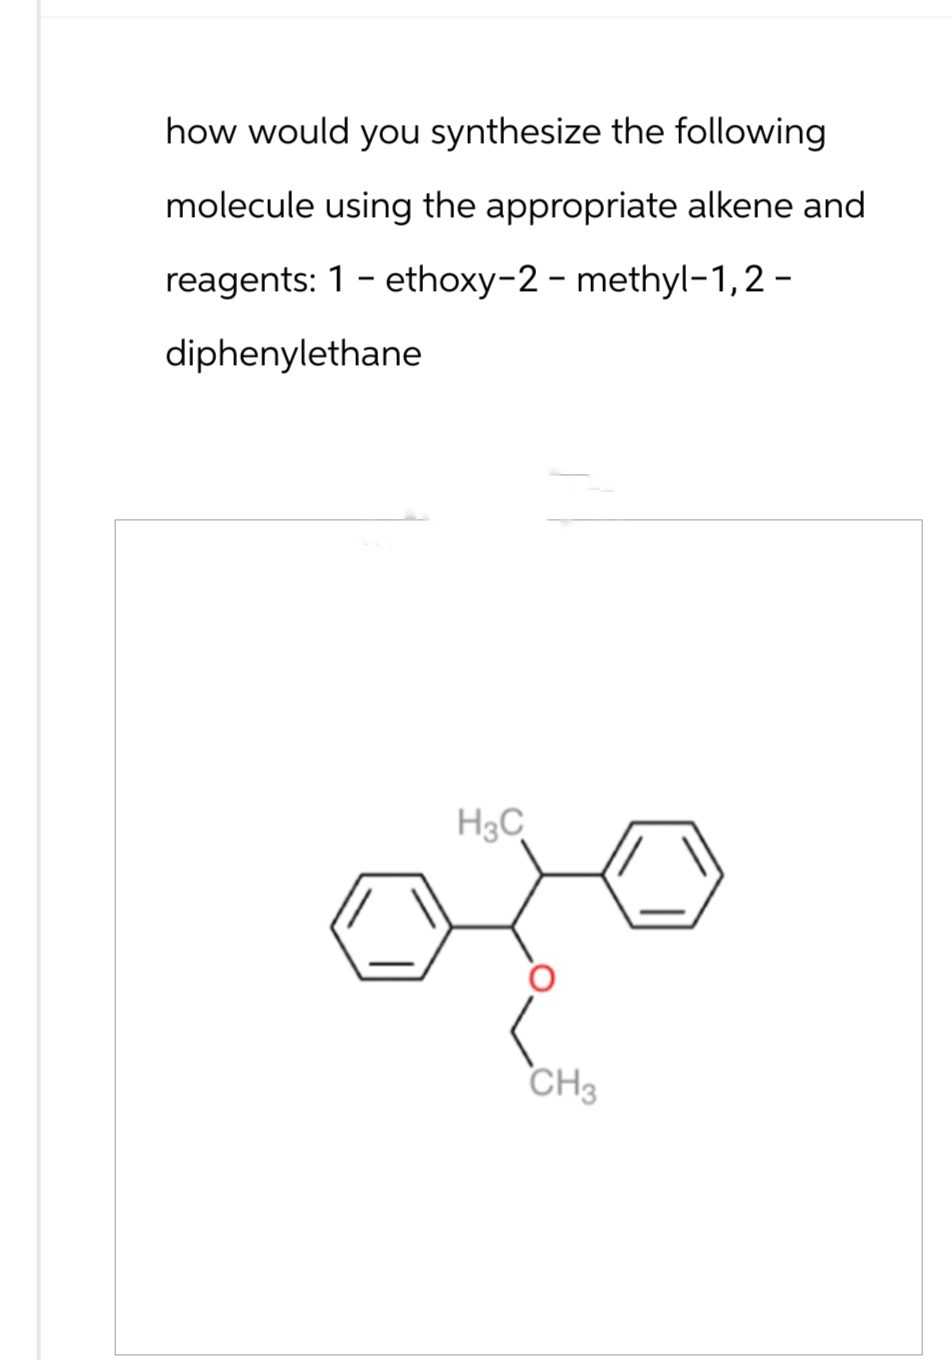 how would you synthesize the following
molecule using the appropriate alkene and
reagents: 1-ethoxy-2-methyl-1,2-
diphenylethane
H3C
CH3